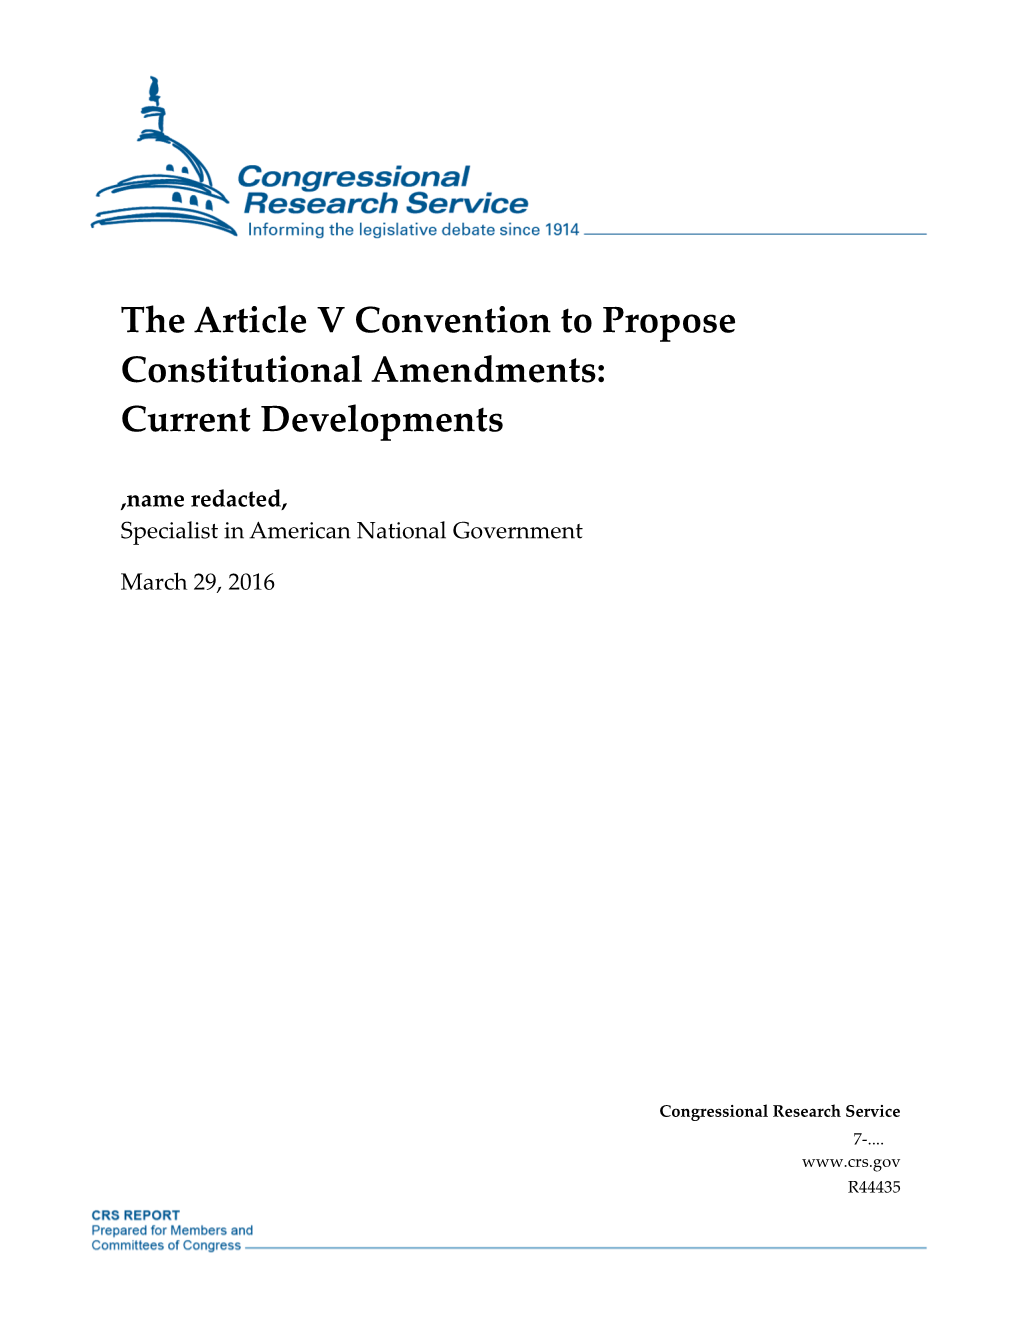 The Article V Convention to Propose Constitutional Amendments: Current Developments